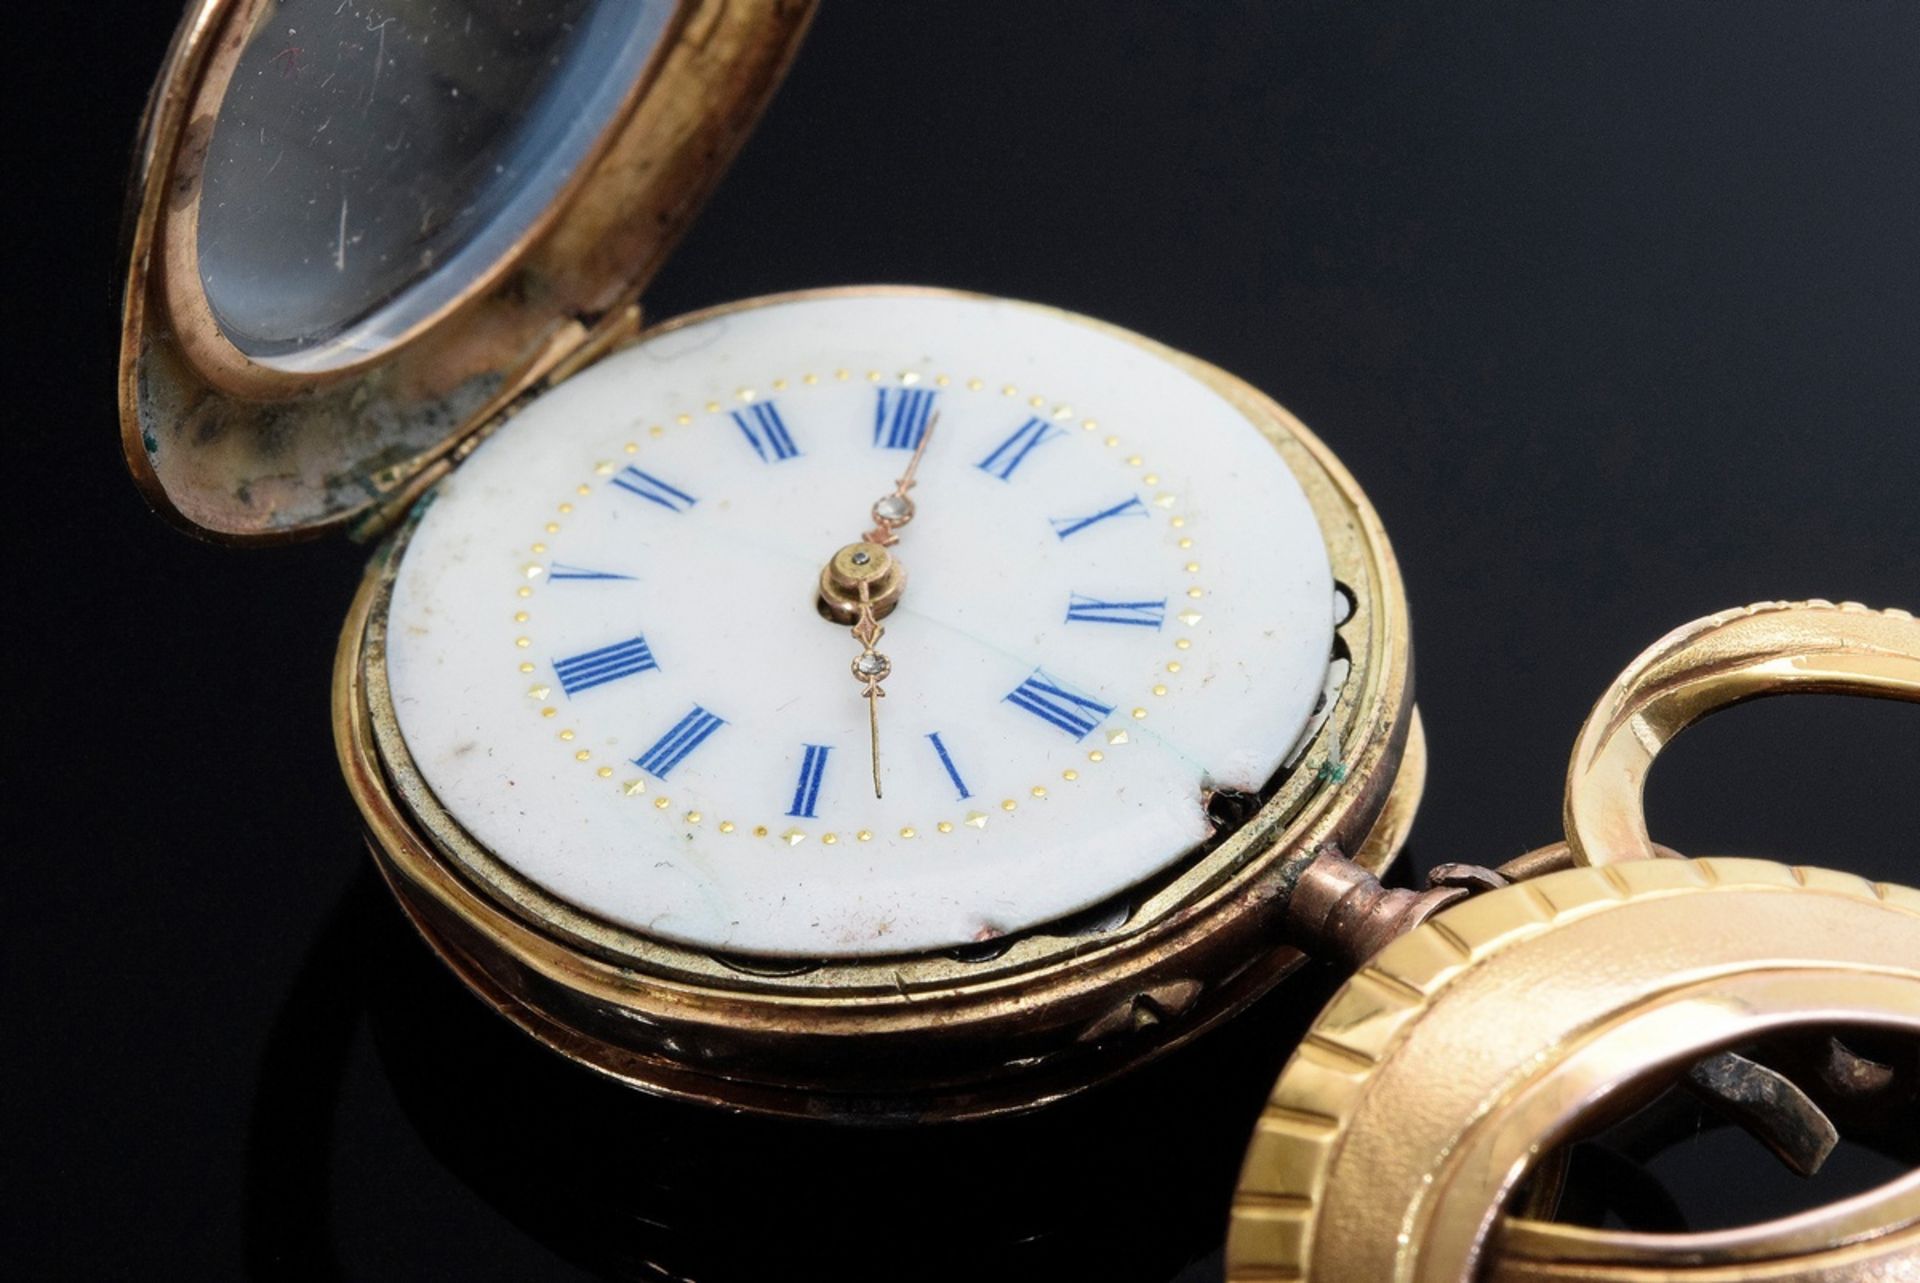 Small RG 585 ladies' salonette on RG 585 knot needle, enamel dial, blue roman numerals, lever movem - Image 3 of 5